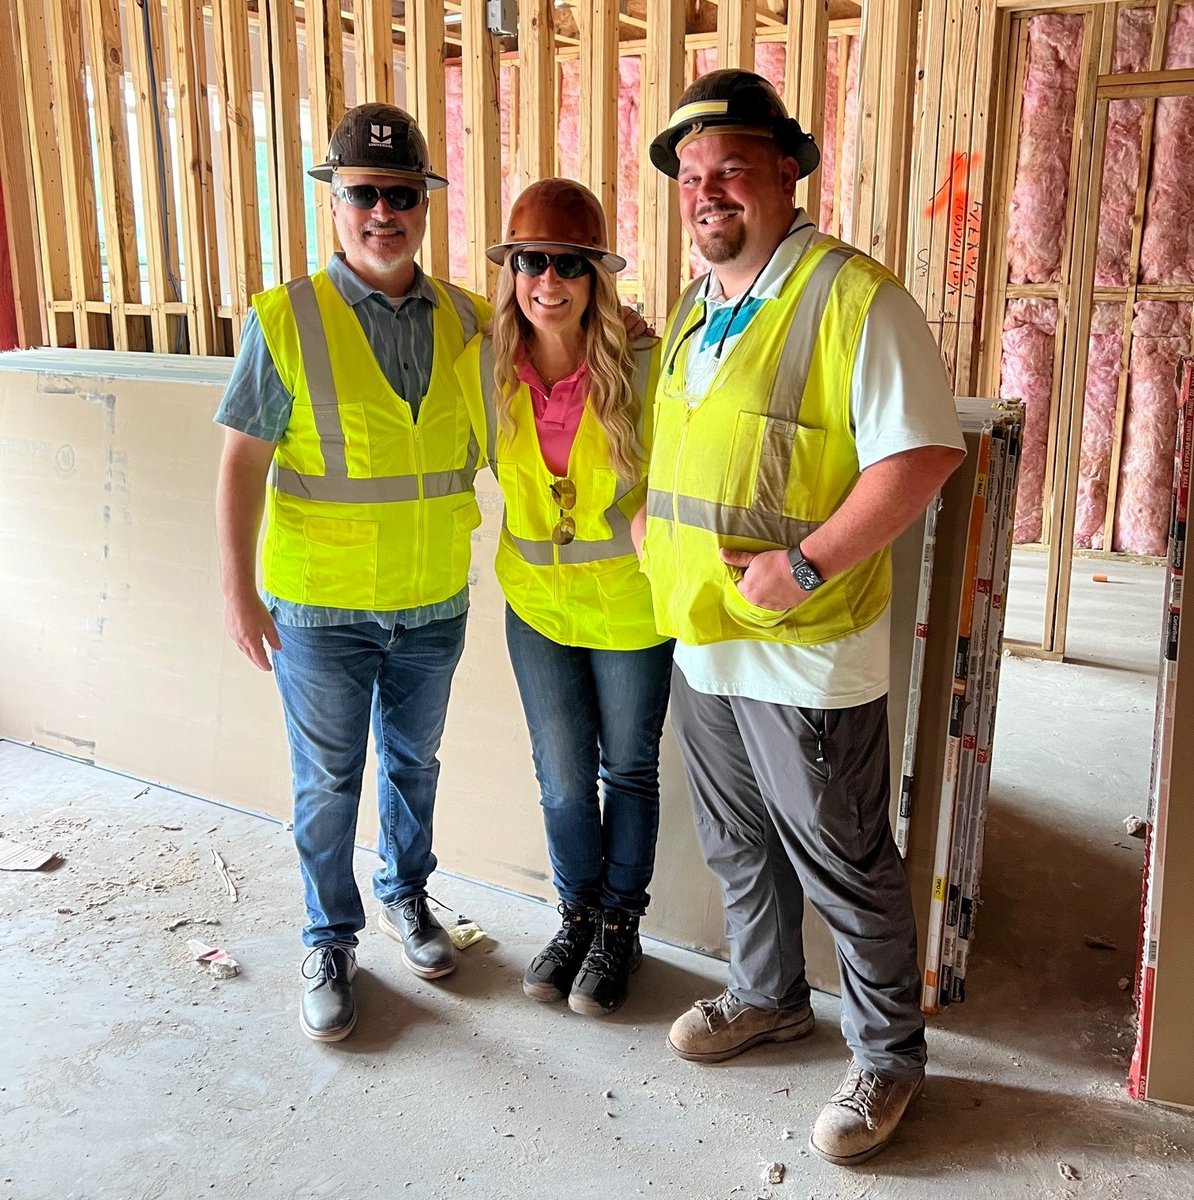 UES #CEO Dave Witsken recently visited Aston at Town Center under the GC Faver Gray in #Jacksonville for a site #safety walk. 🚧 The walk focused on the extent of the work we are contracted to observe for #codecompliance. 📷#Construction #Engineering #SiteSafety #NorthFlorida